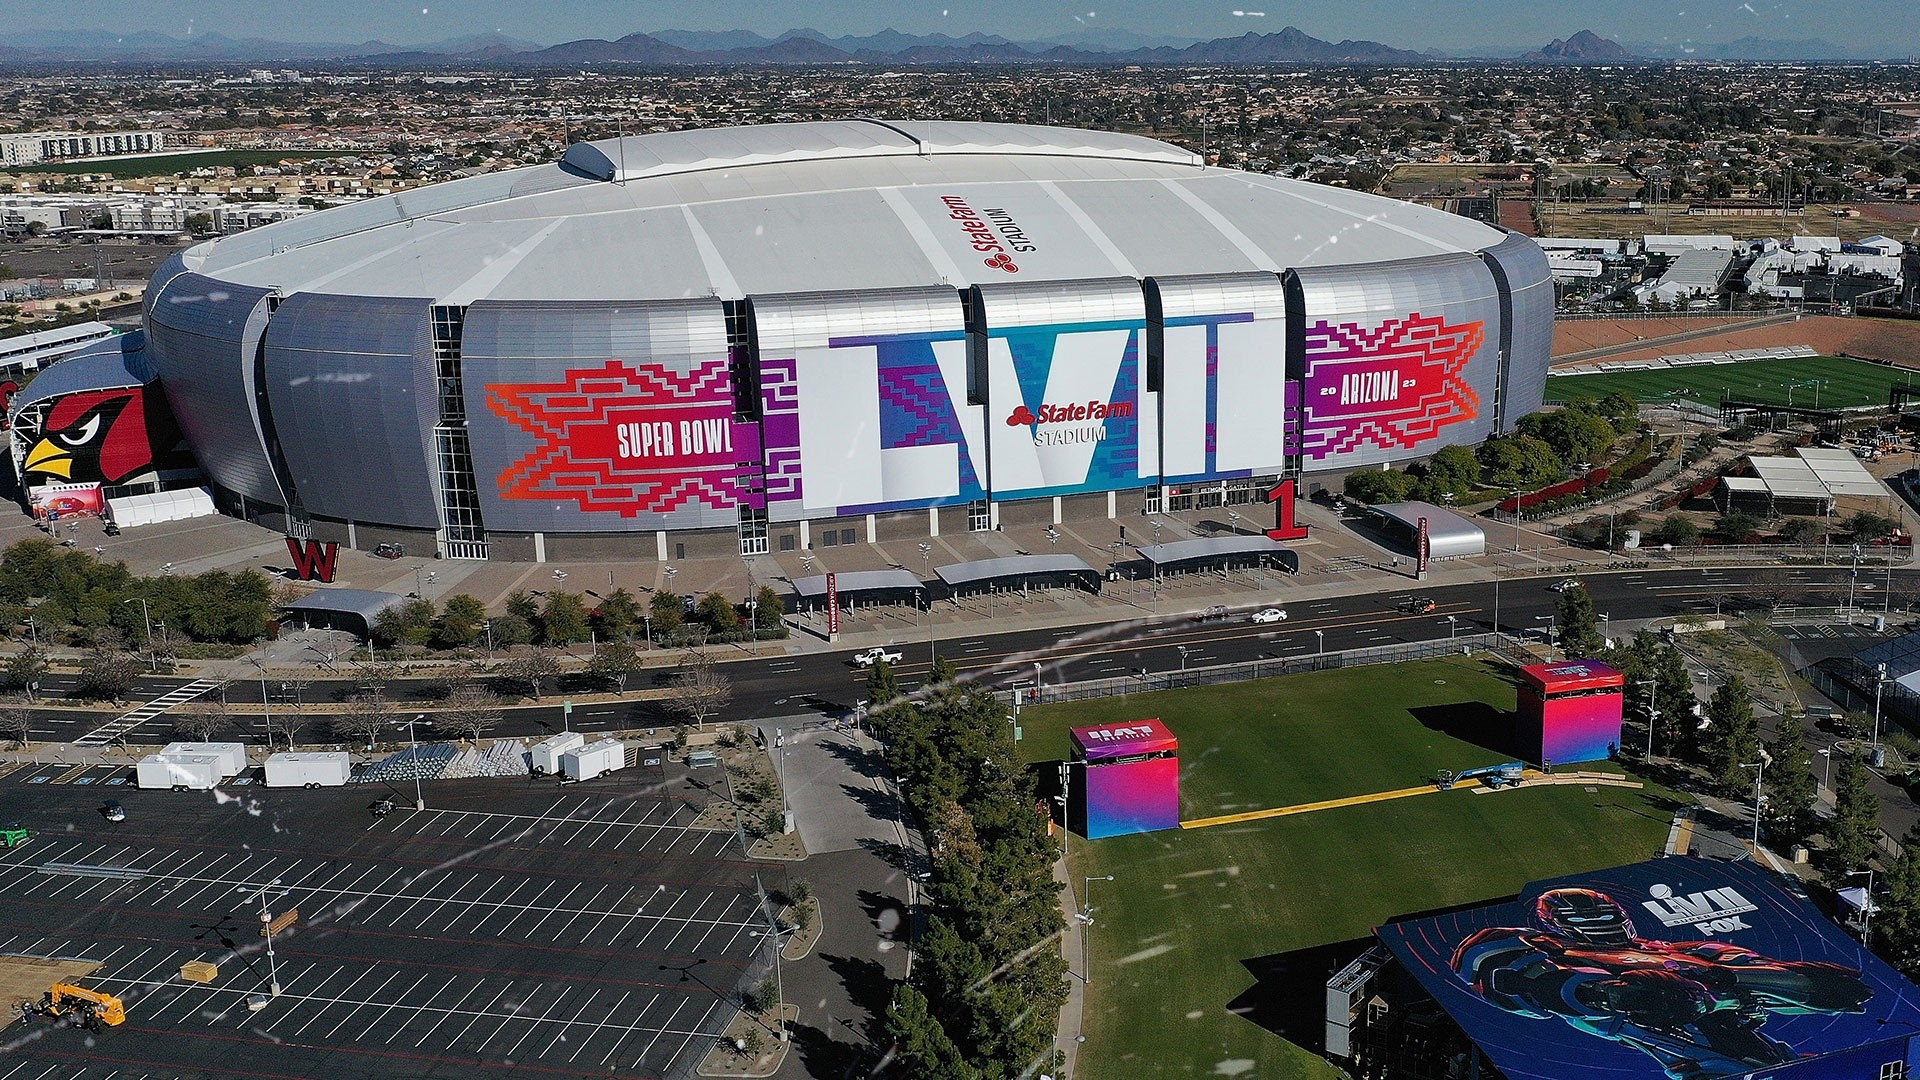 Watch all of the 2021 Super Bowl ads; costing $5.6 million for 30 seconds